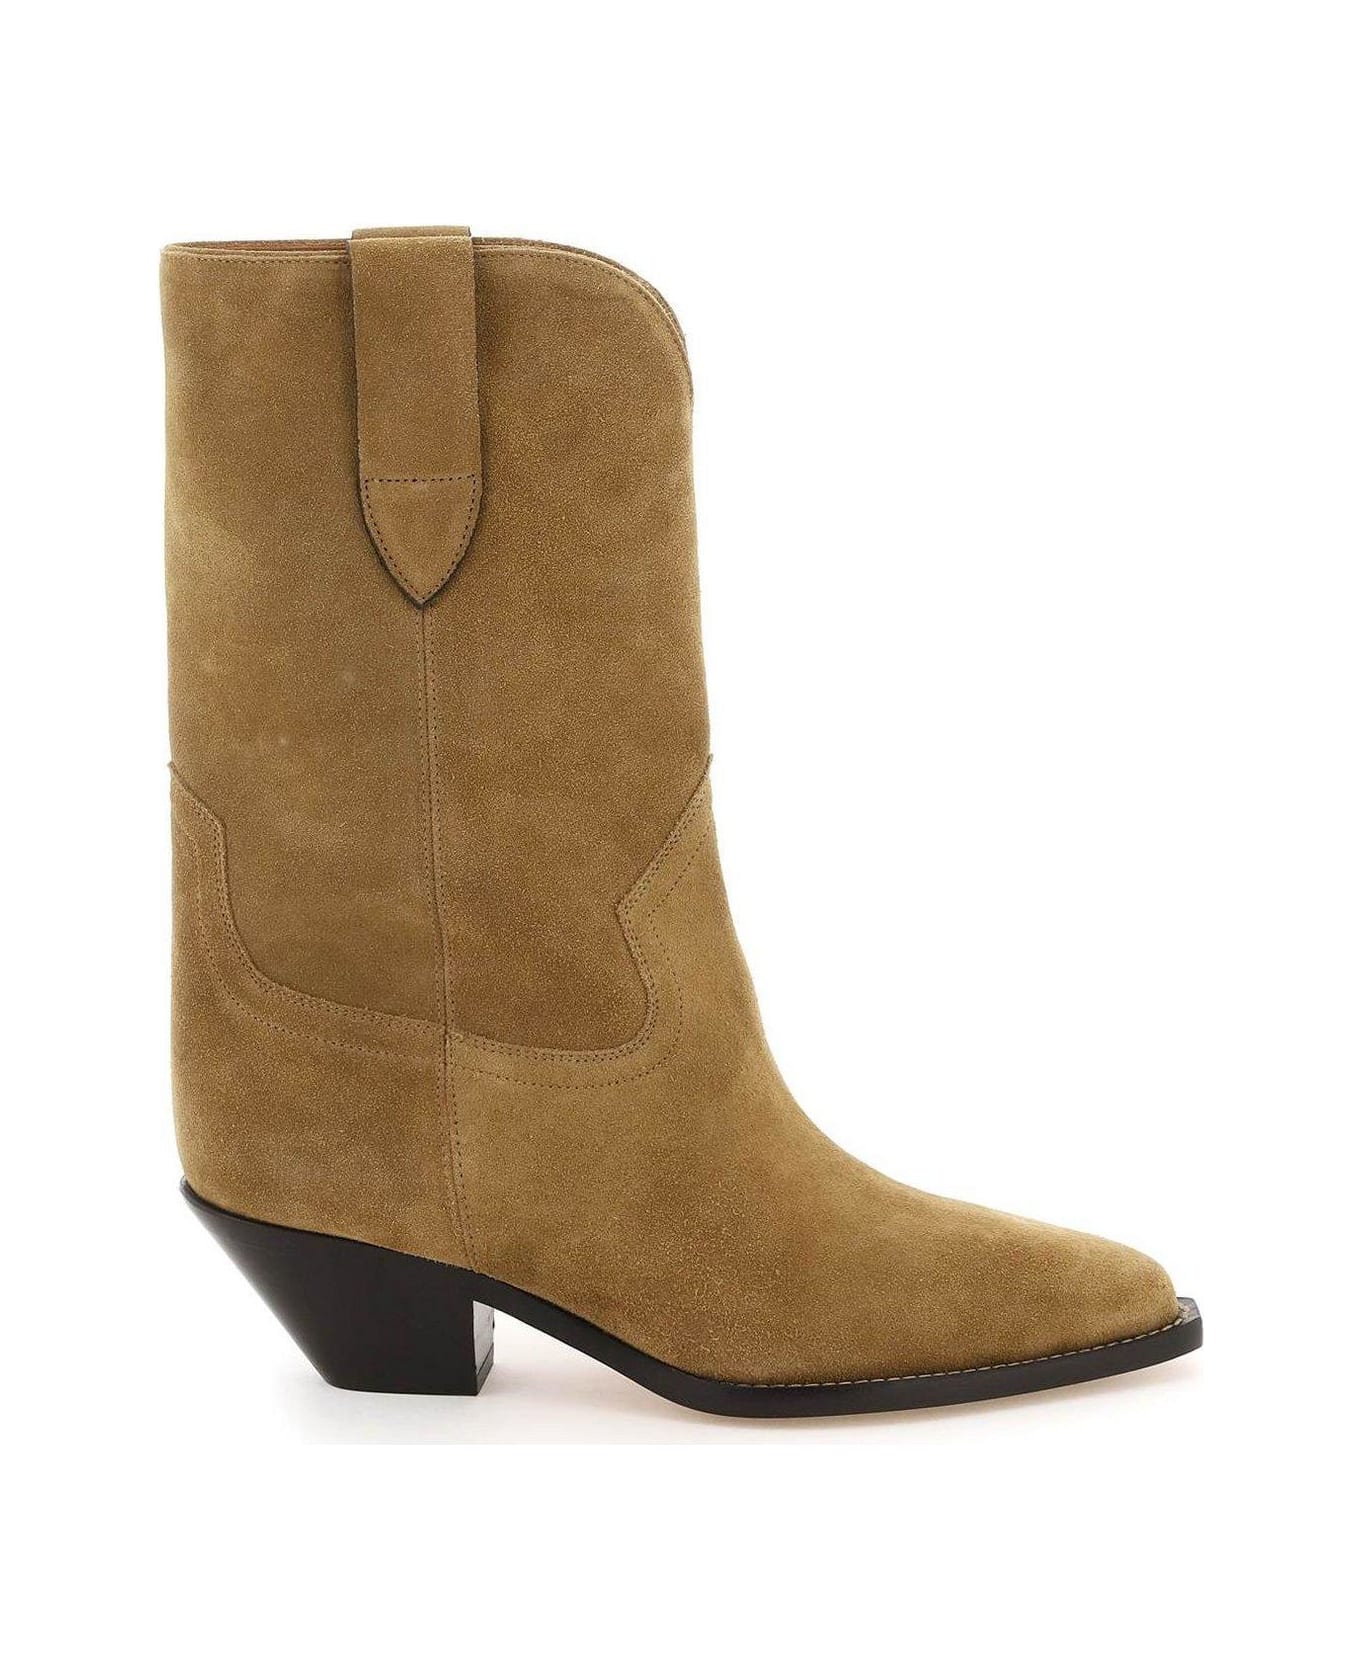 Isabel Marant Duerto Pointed Toe Boots - BROWN